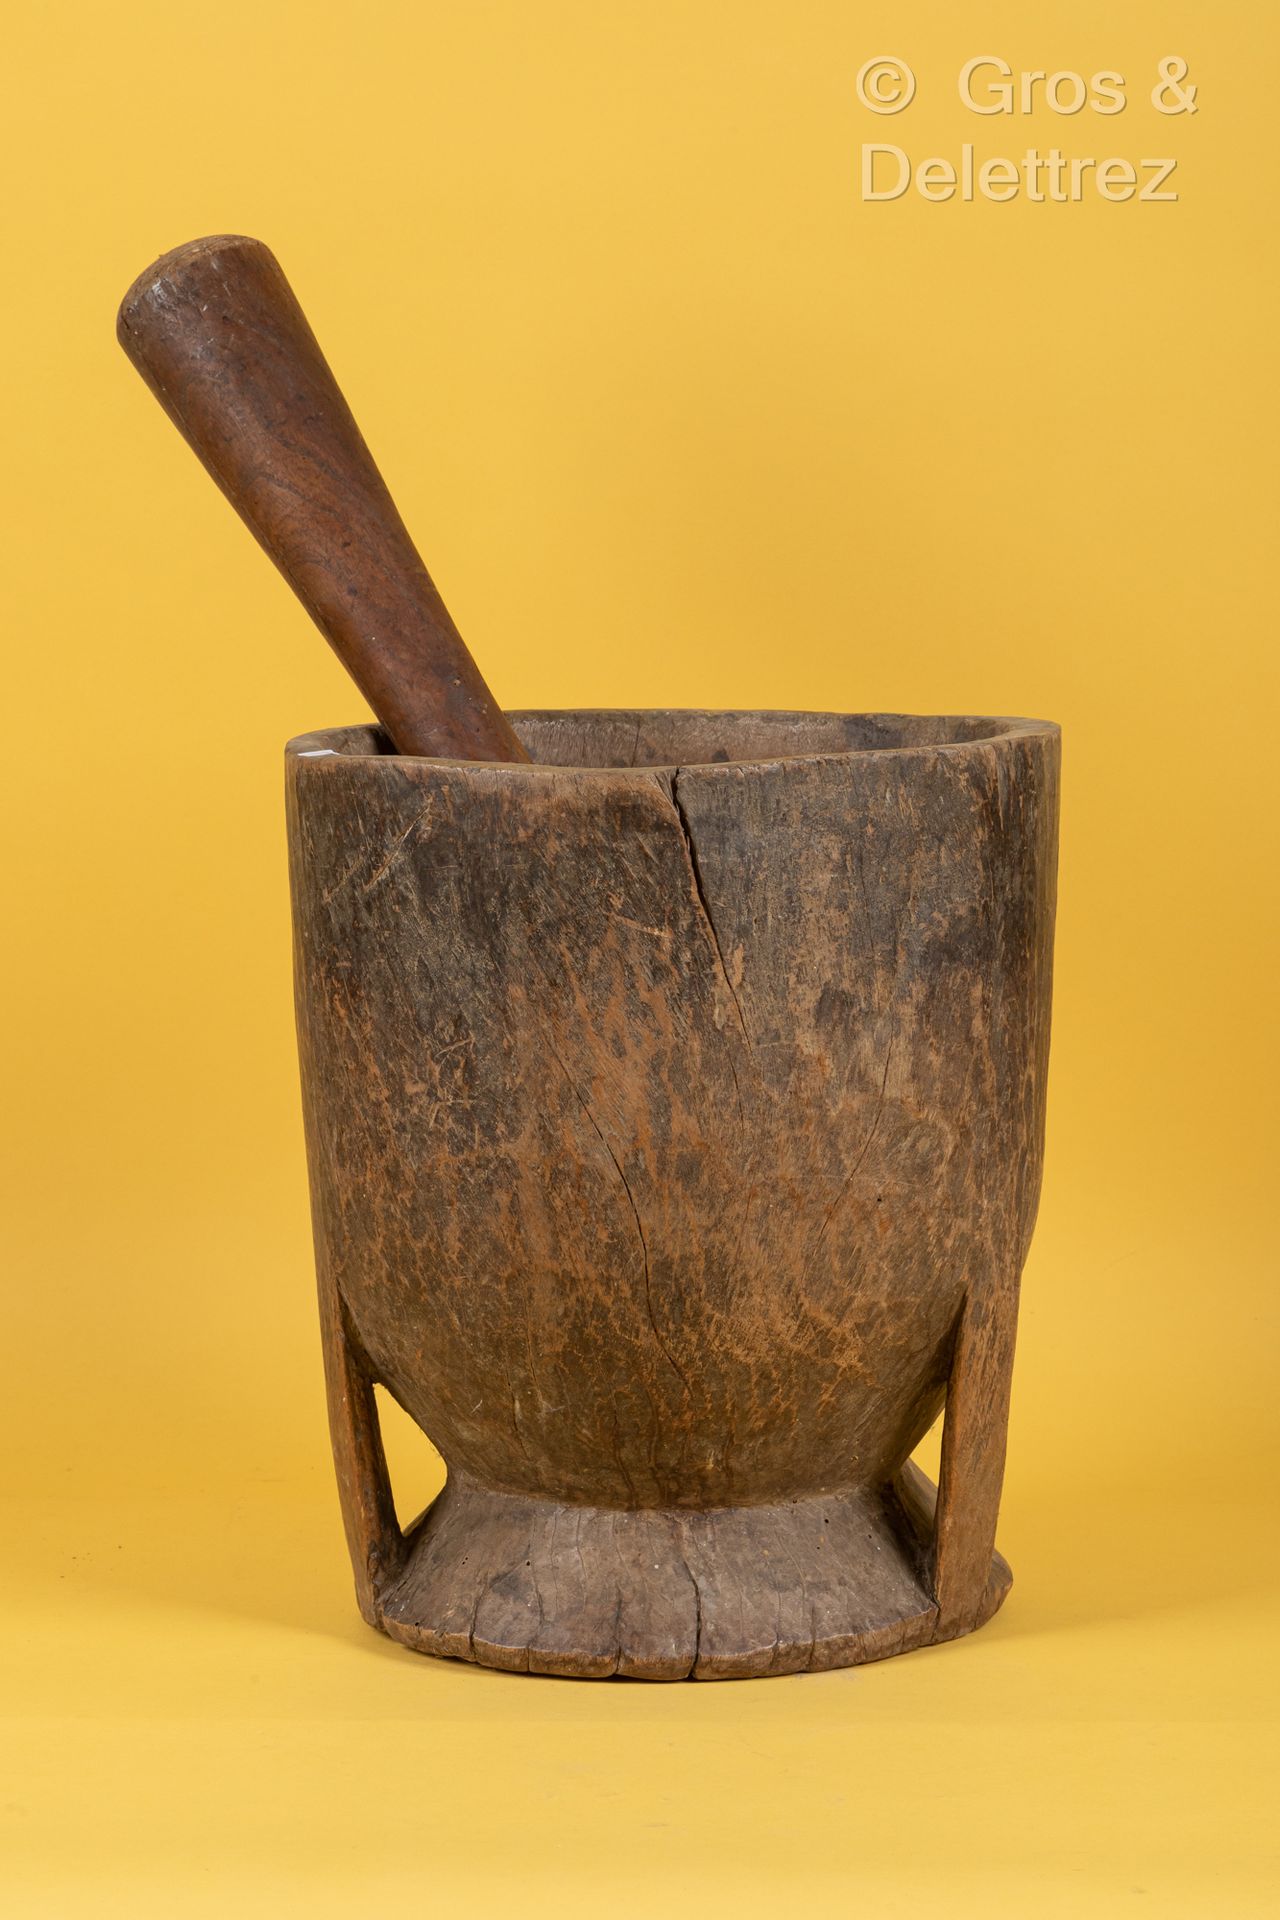 TCHAD Mortar out of wooden openwork in low part, one joined two pestles there.
D&hellip;